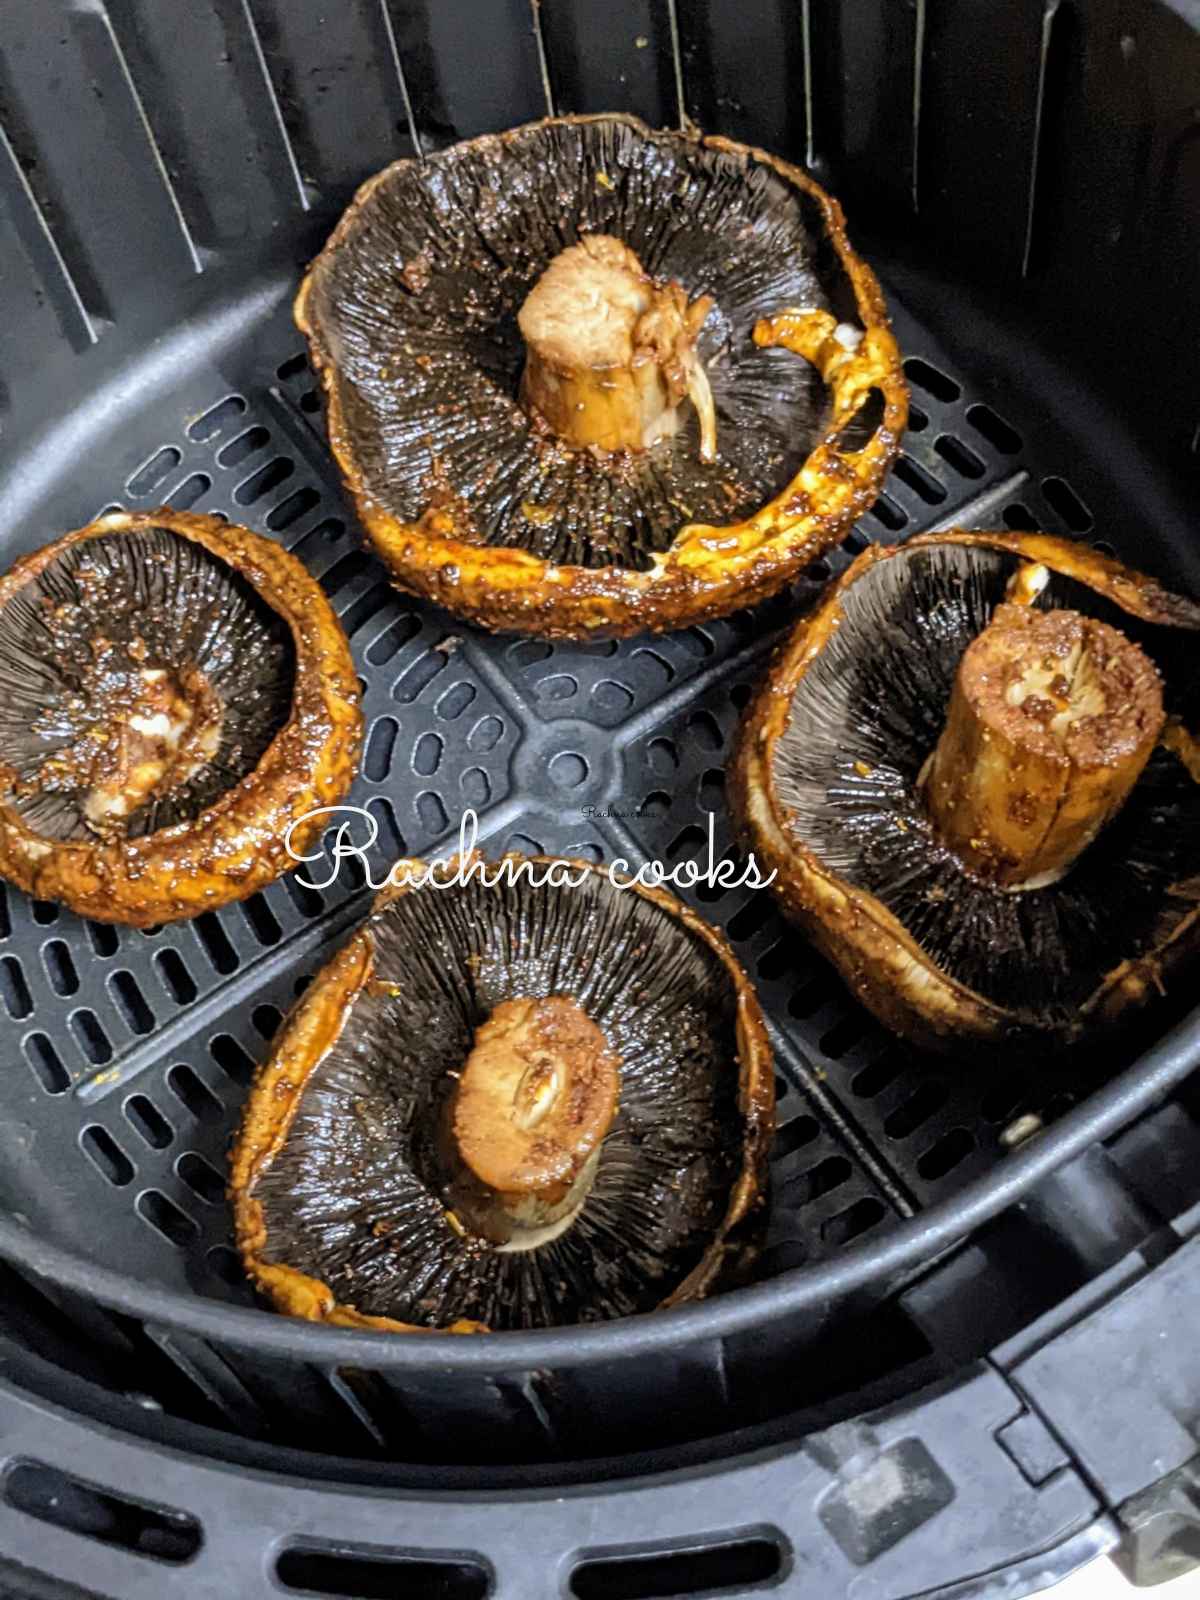 Marinated mushrooms placed in air fryer basket ready for air frying.